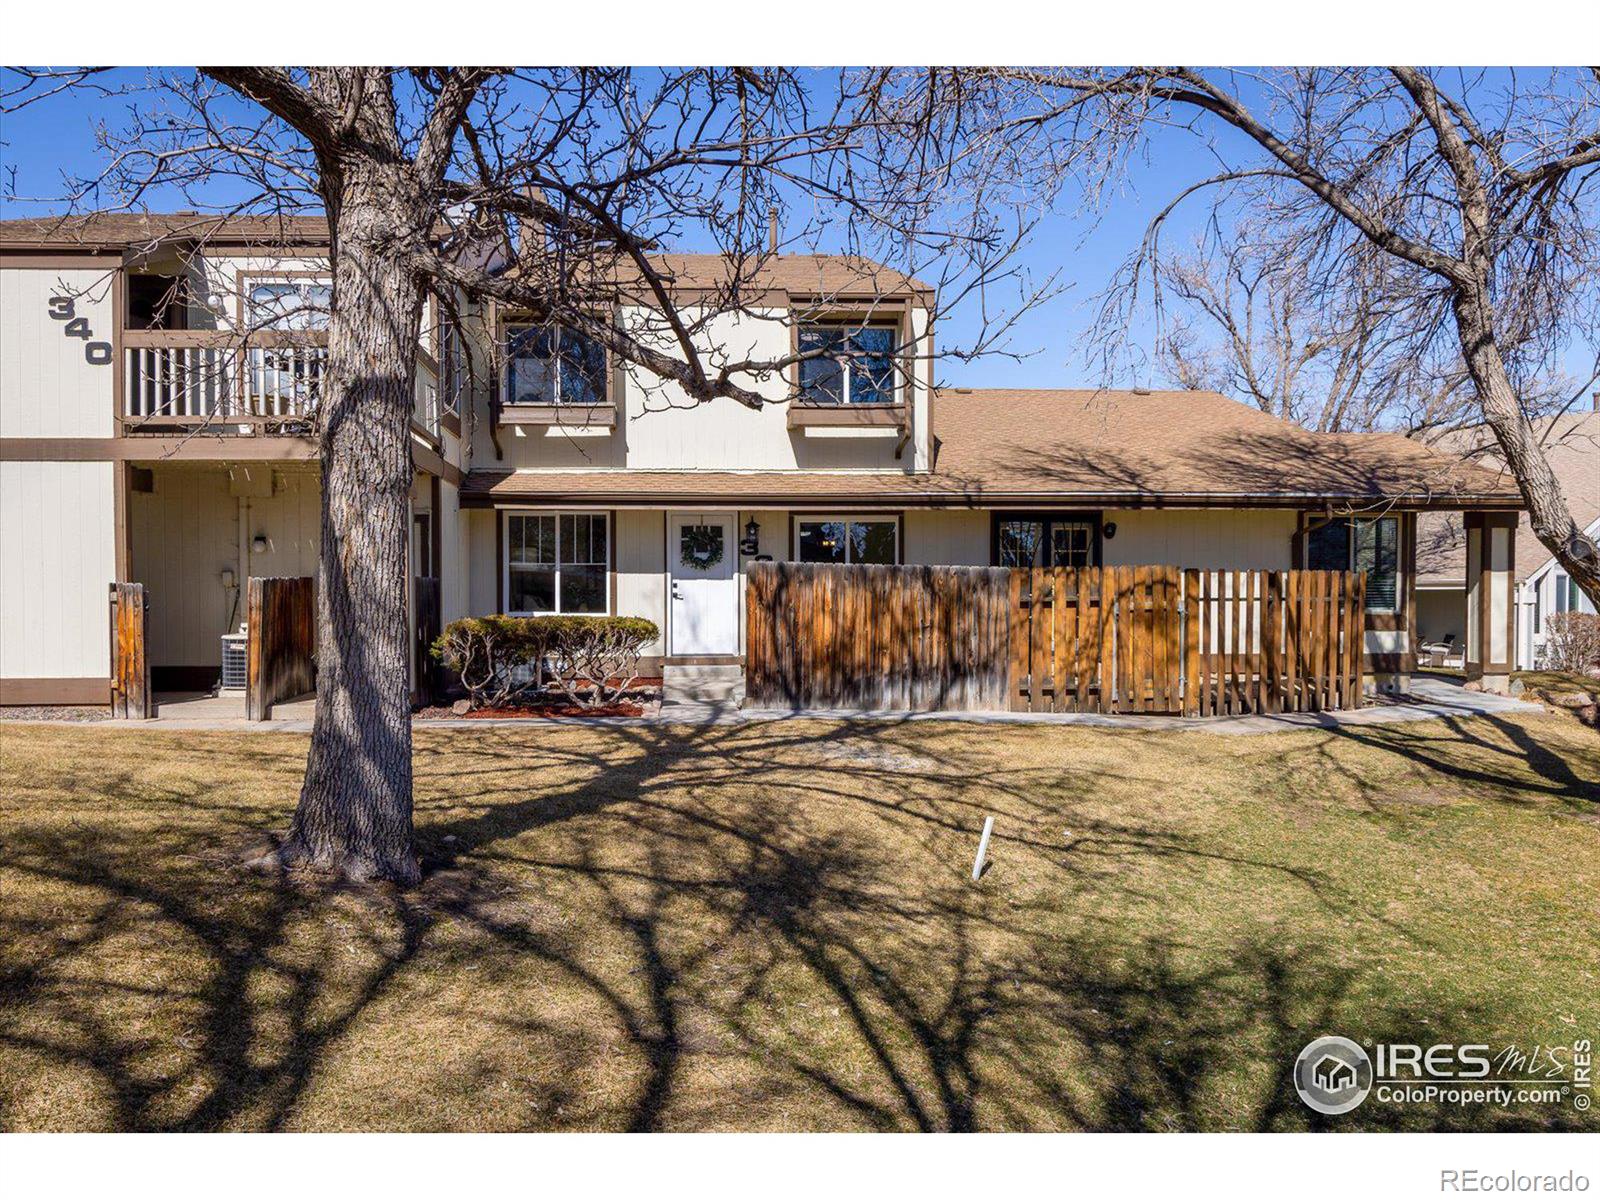 8654  chase drive, Arvada sold home. Closed on 2024-03-29 for $401,000.